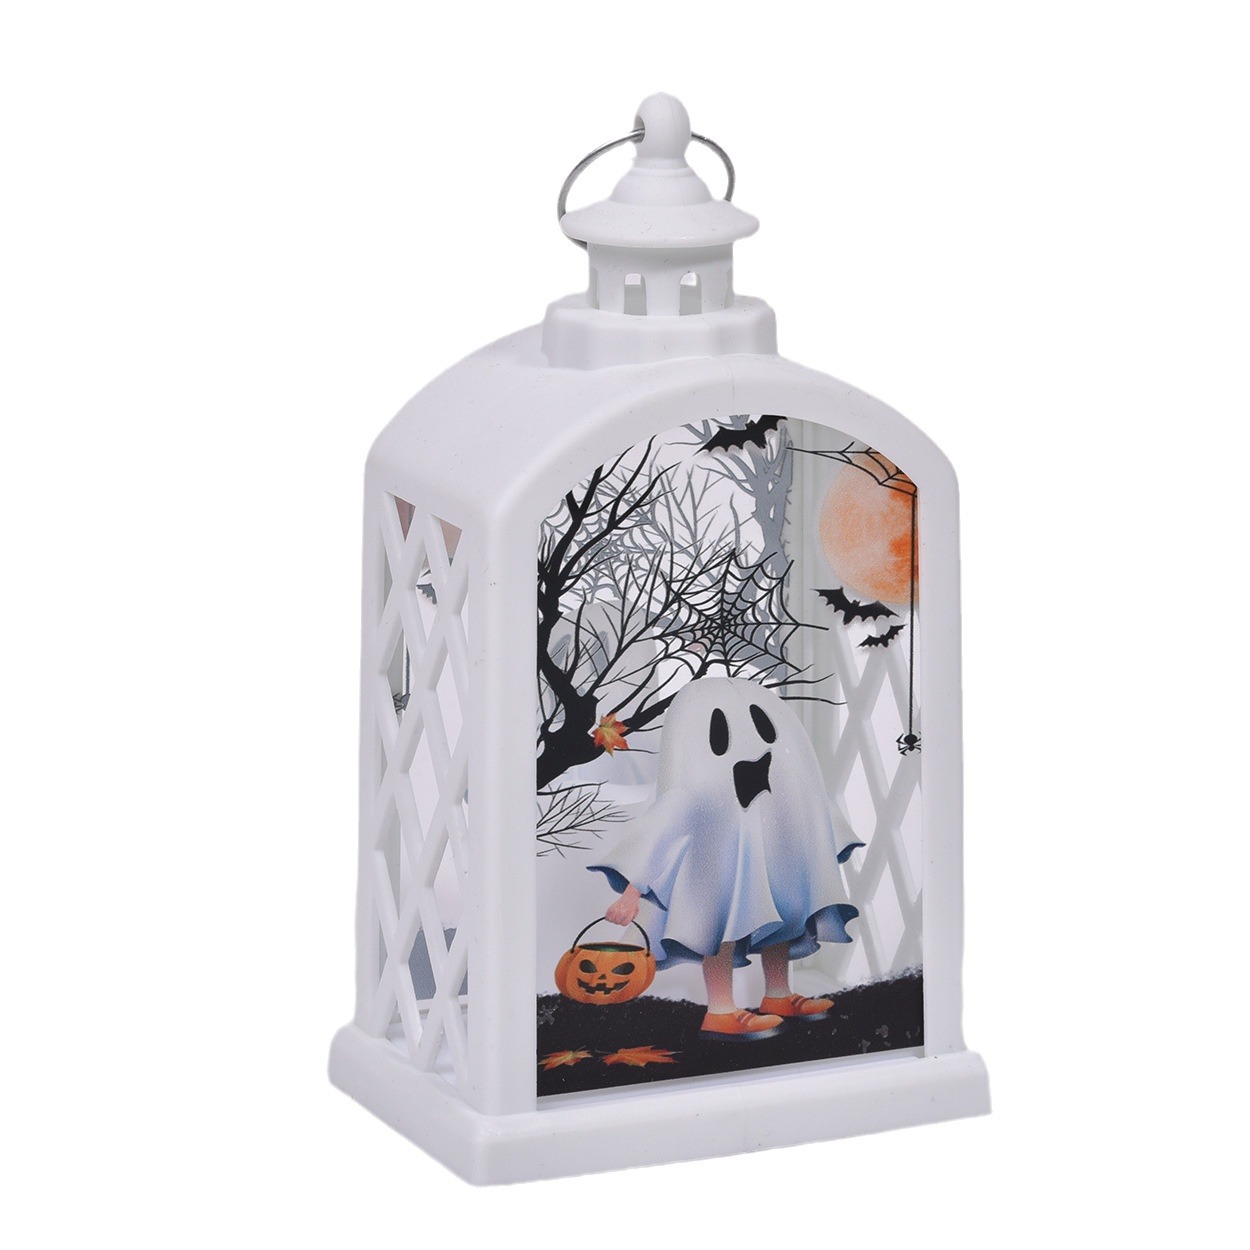 New Retro Small Night Lamp Creative Living Room Simple Electronic Candle Halloween Decoration Stall Wholesale